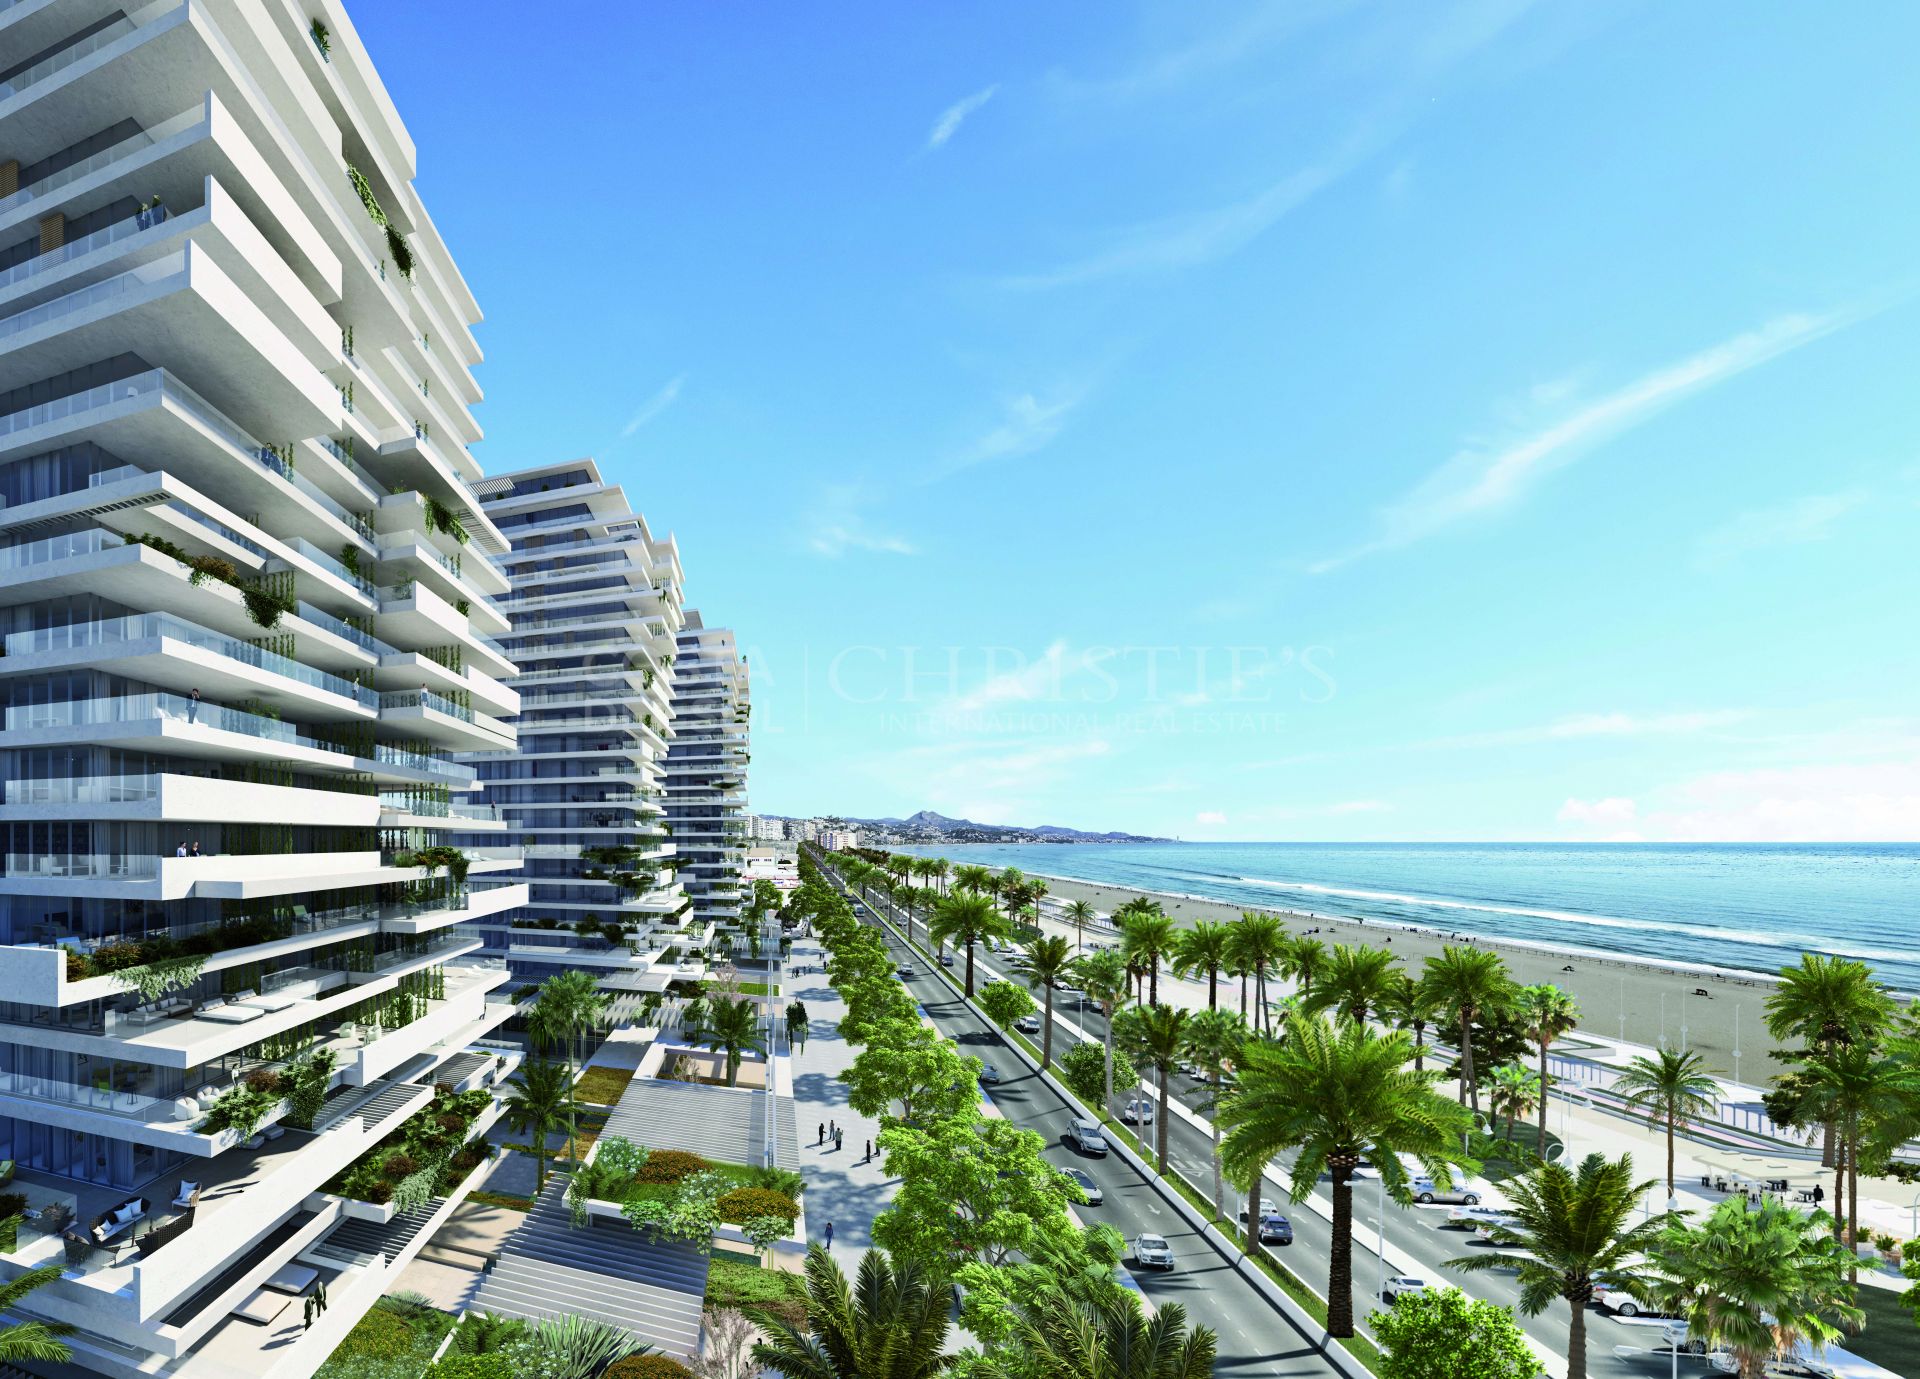 Luxury modern apartments on the seafront with spectacular views